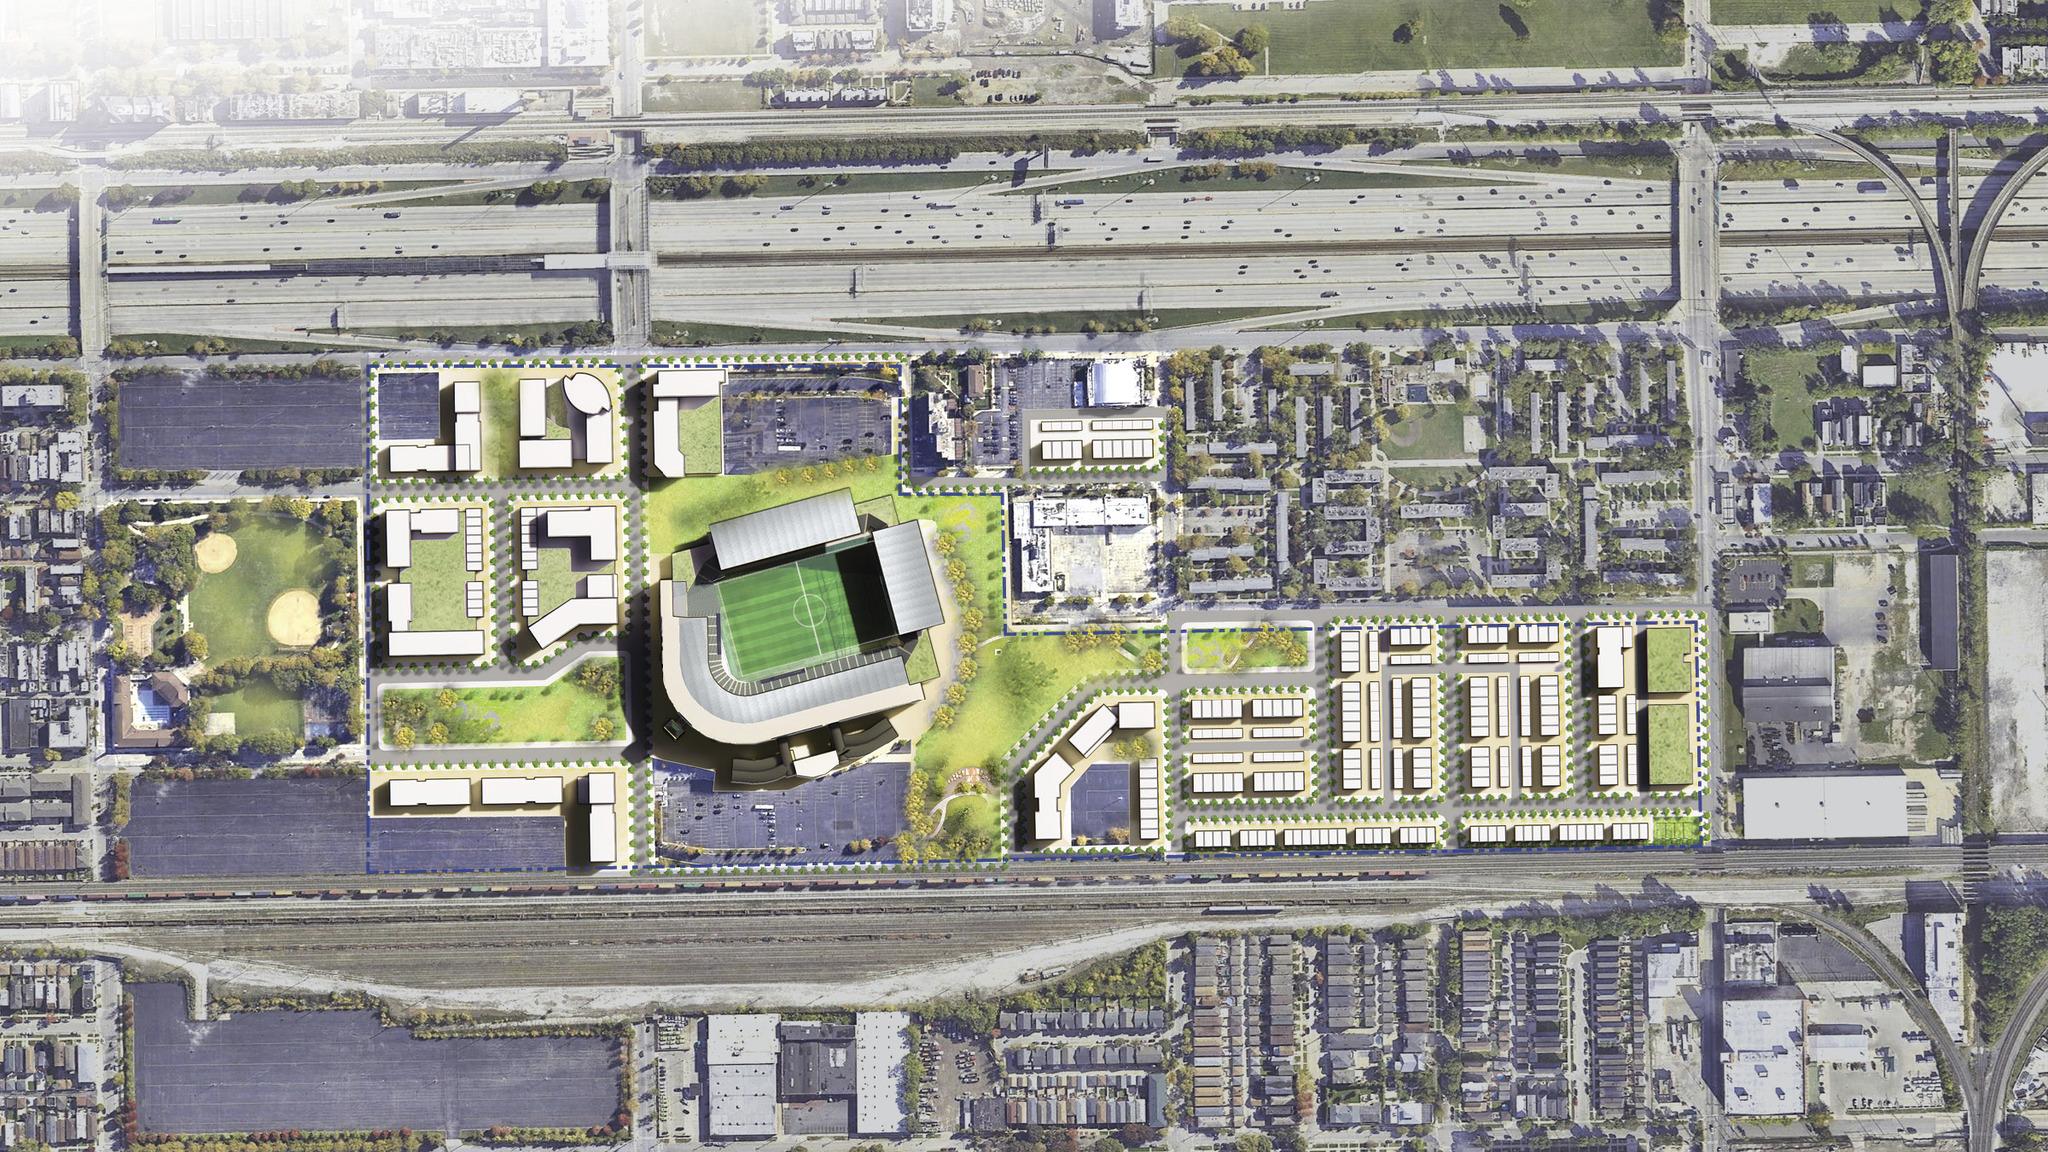 A site map of the current White Sox stadium and surrounding development, including housing in Bridgeport around the current stadium. (Credit: Related Midwest)